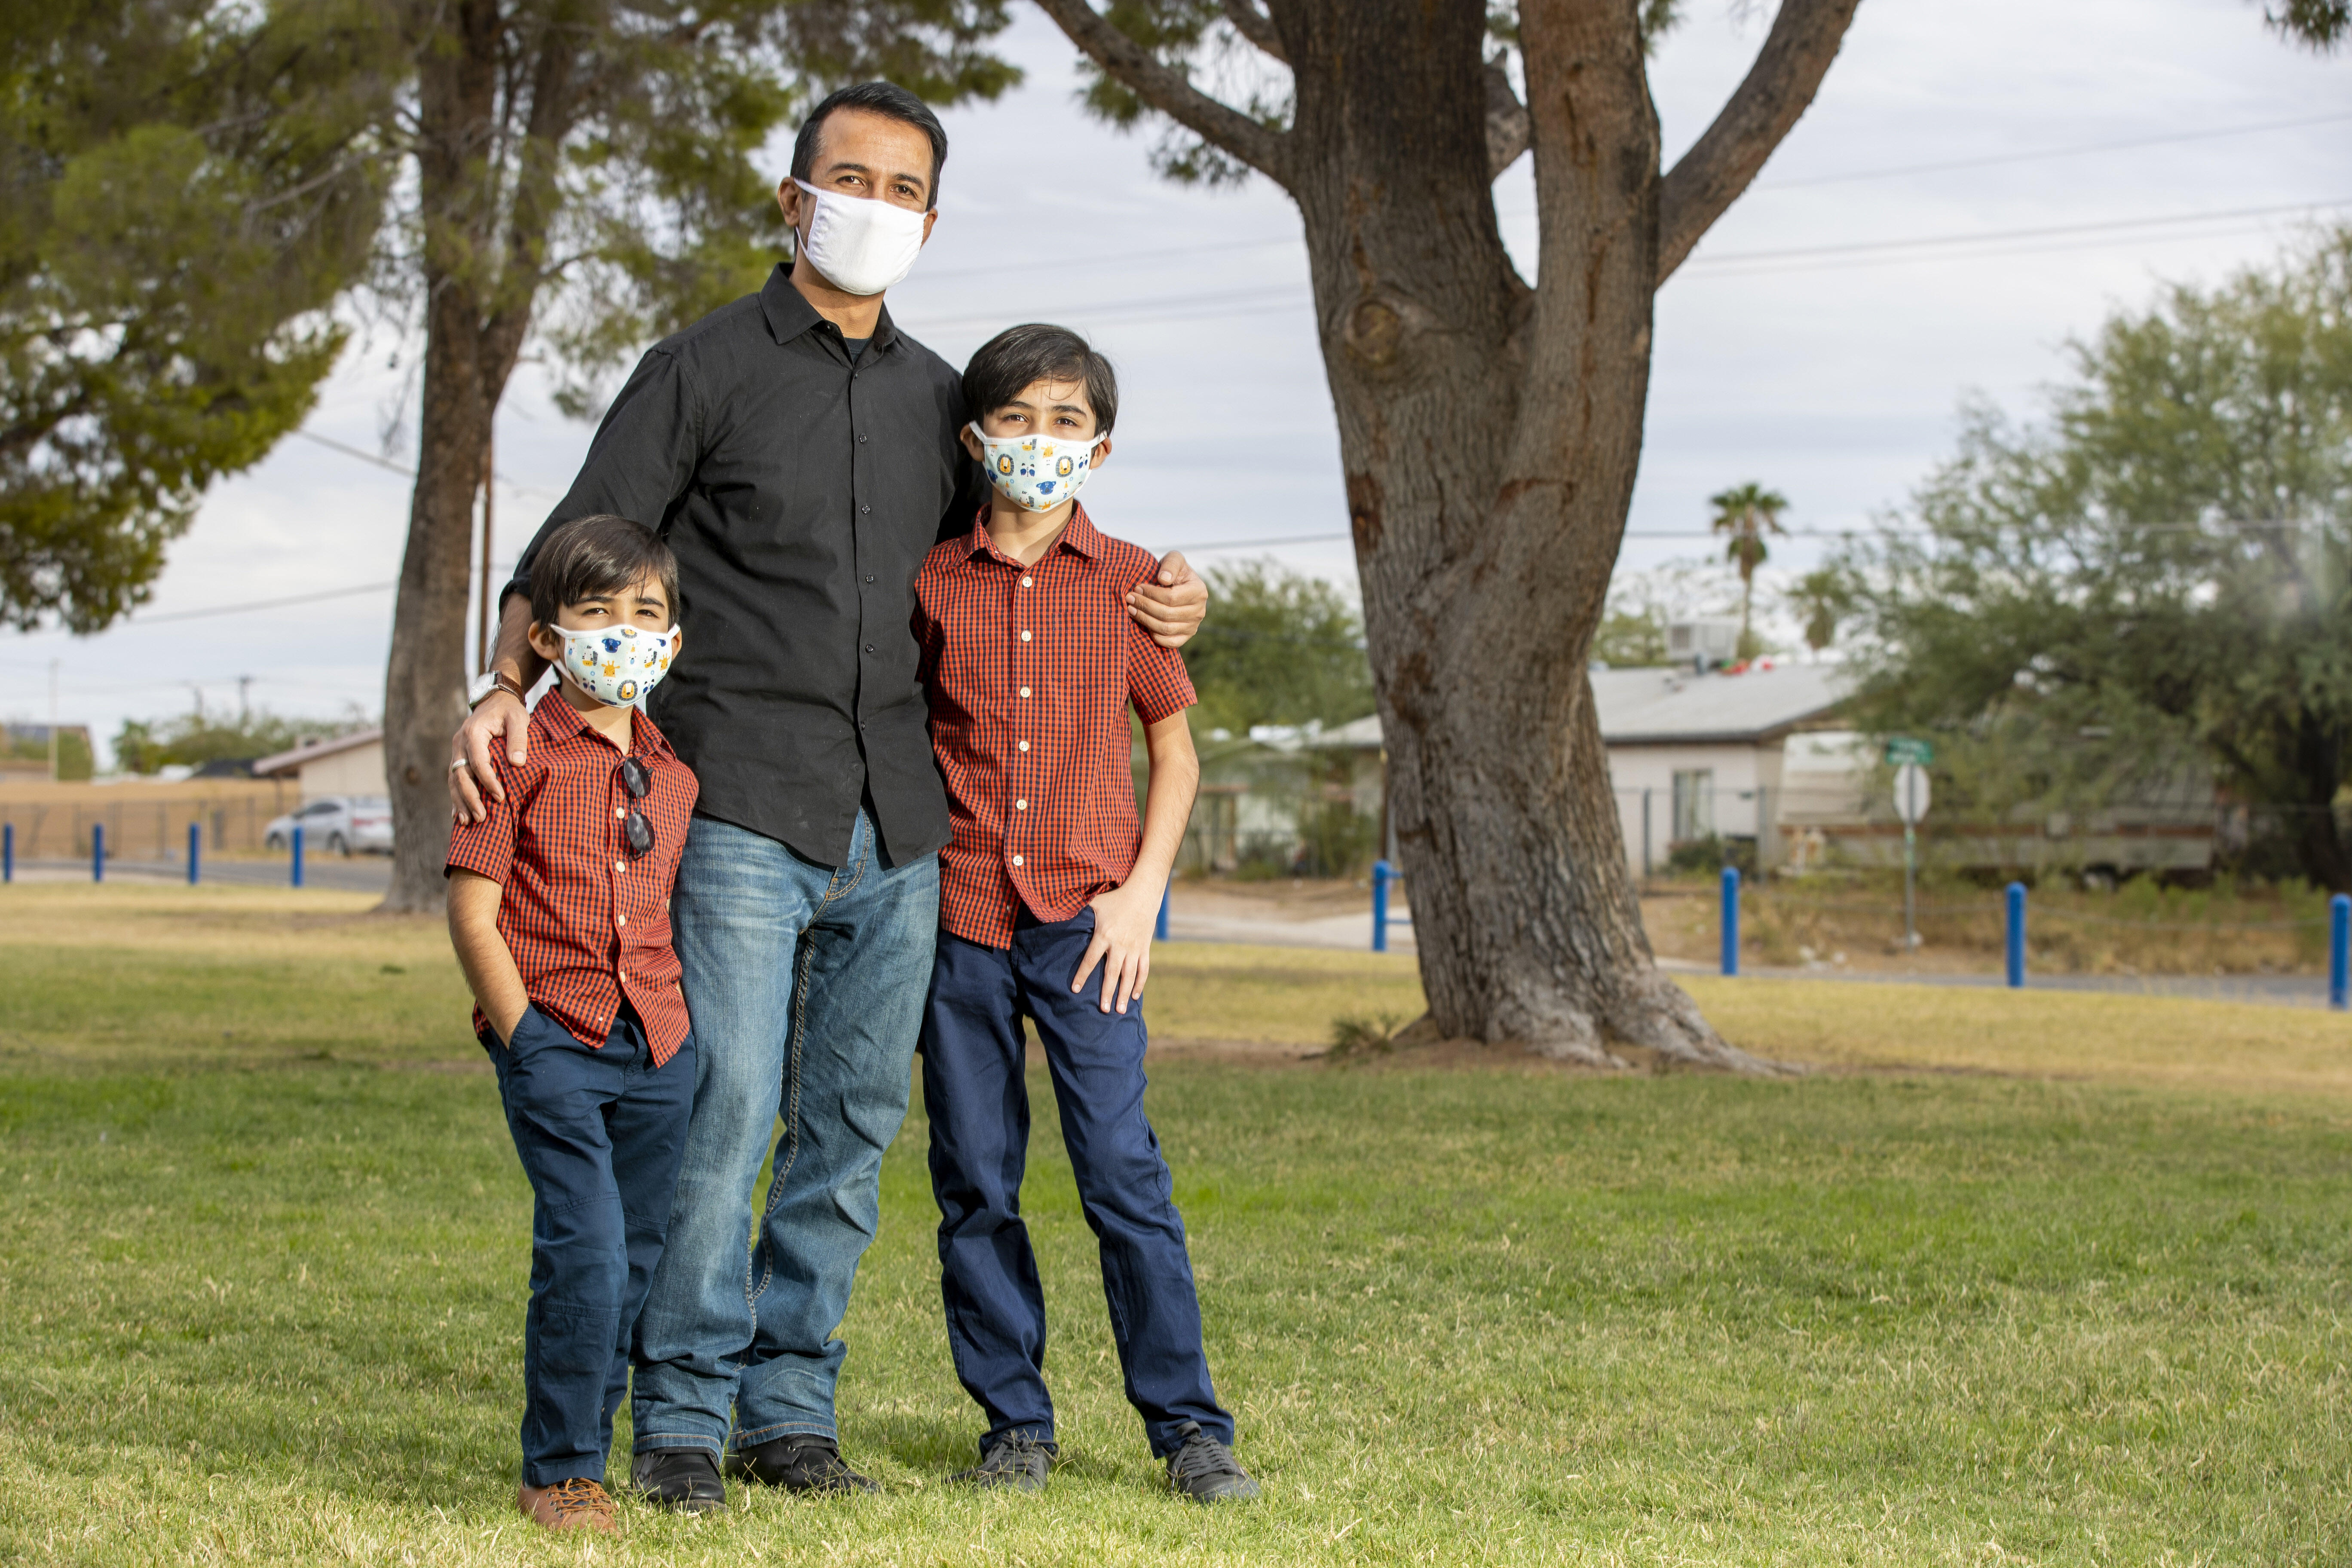 A man stands with his arms around his two young sons in Pima County, Arizona. They are wearing facemasks to protect them from COVID-19.